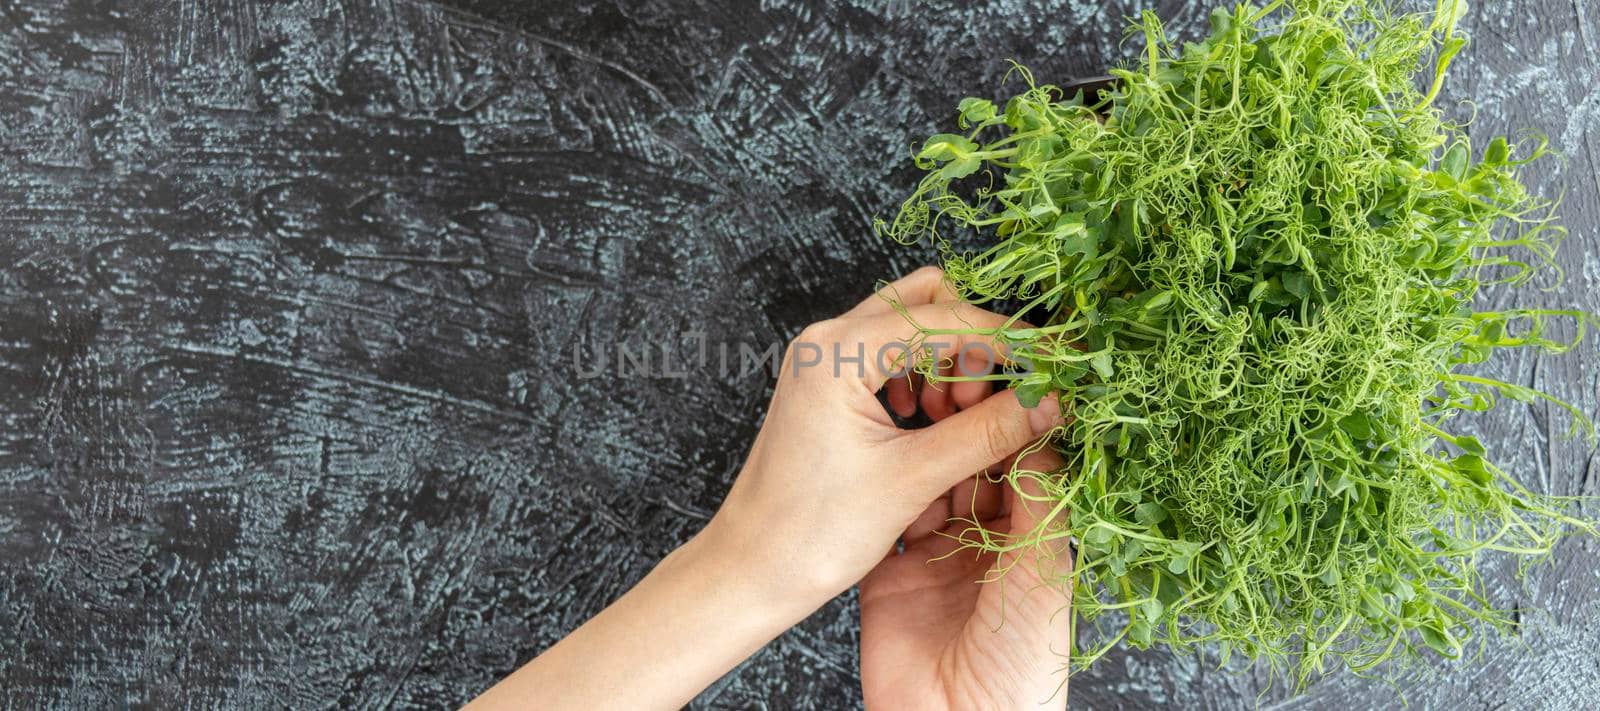 banner with Female hands pluck young sprouts of peas or beans. green, juicy, fresh salad in container on black textured background. healthy food concept. Top view